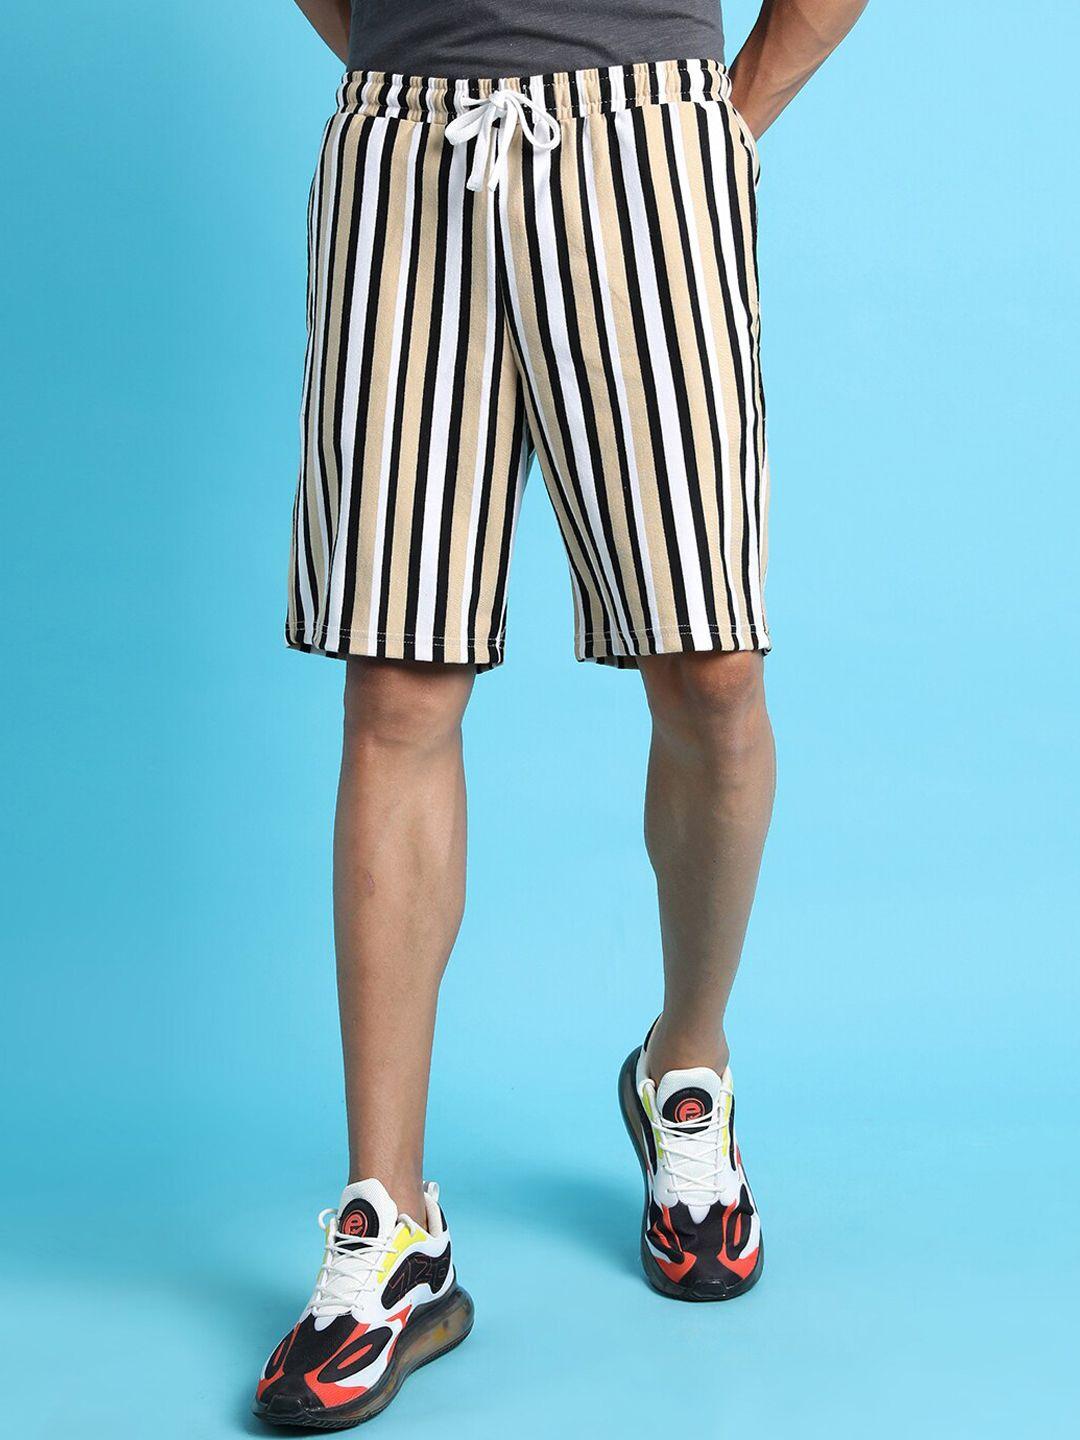 campus-sutra-men-white-striped-regular-fit-outdoor-shorts